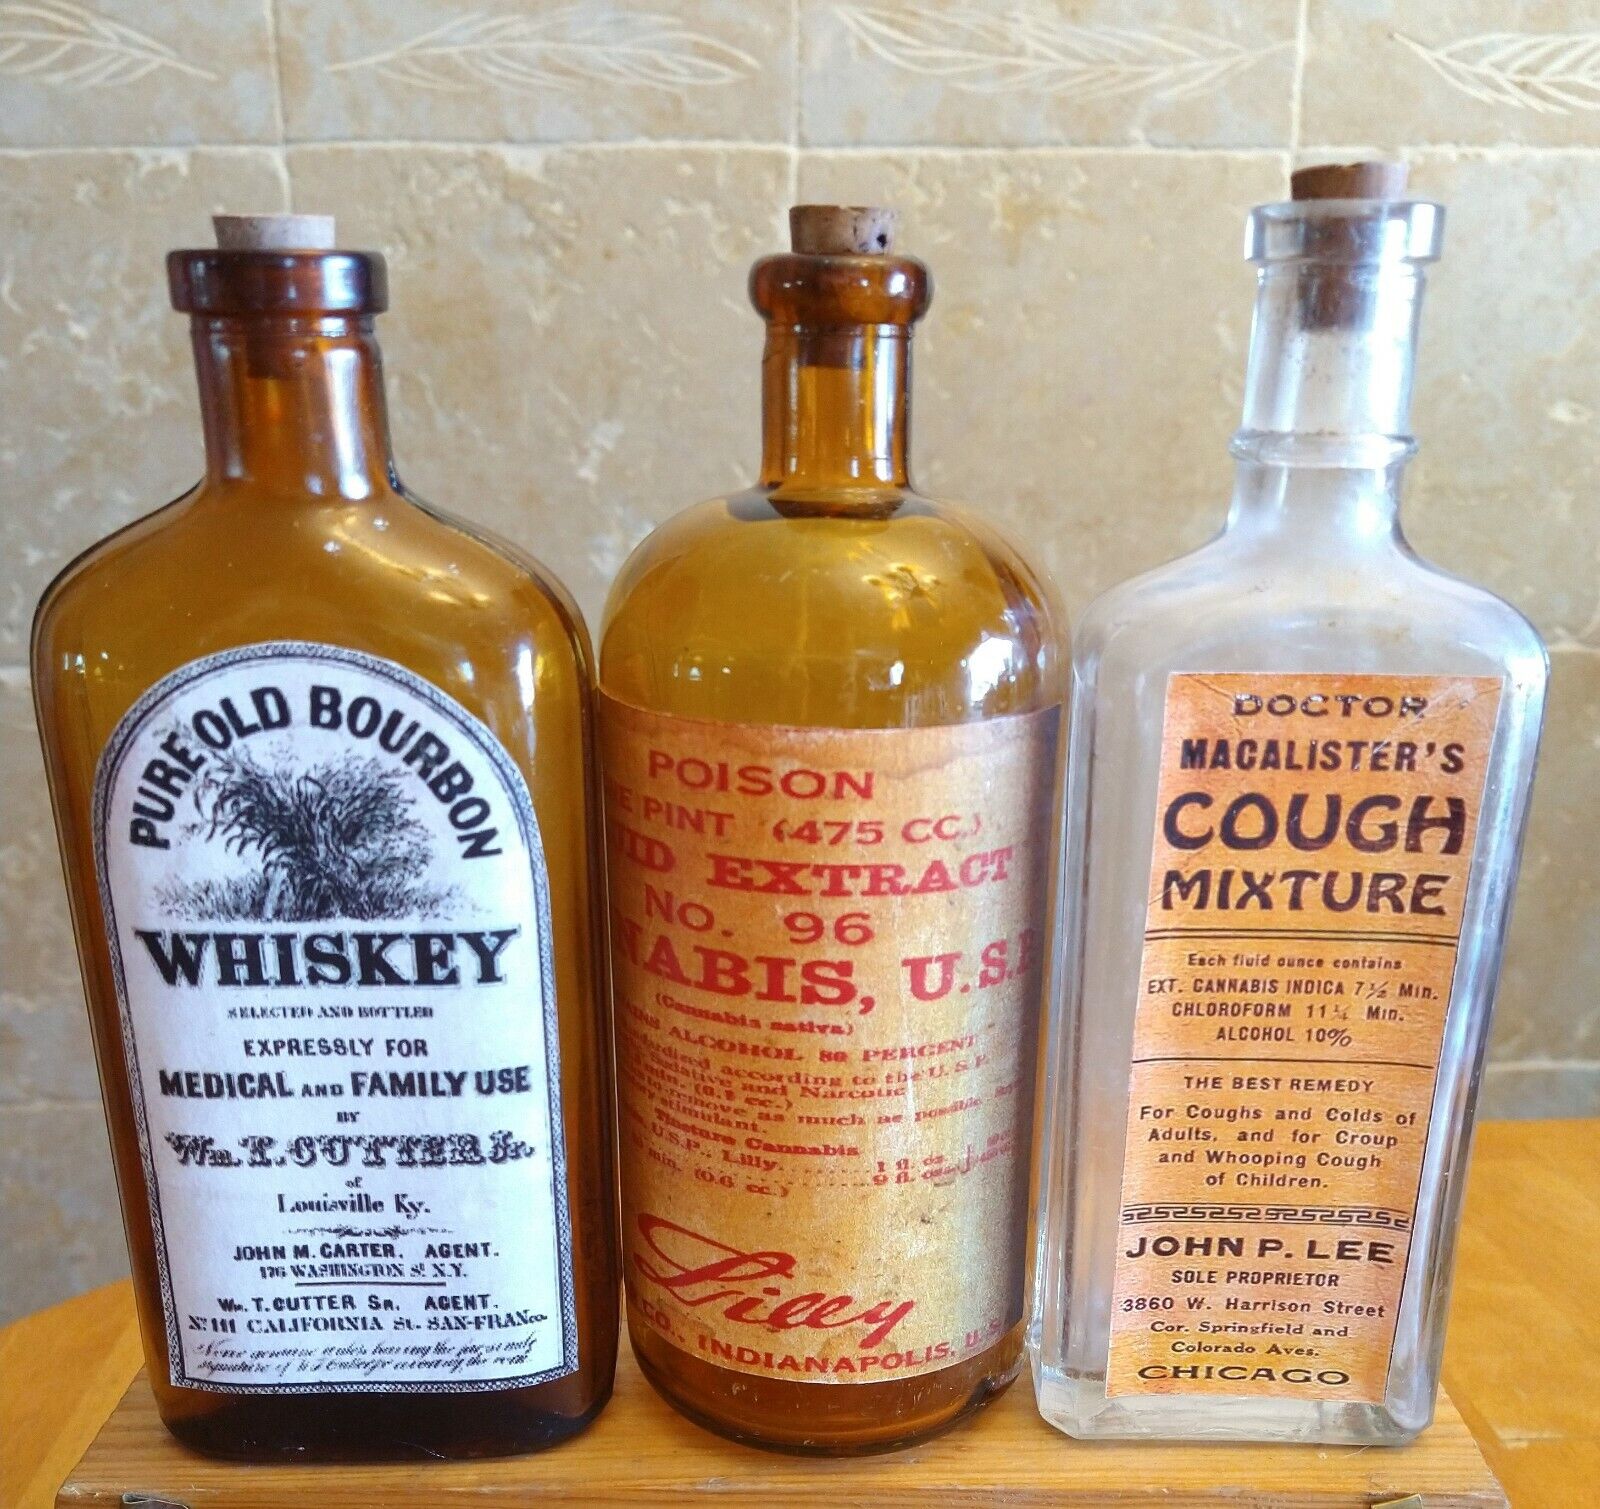 Vintage Family Medicine Hand Crafted Bottles,Cannabis,Medical Whiskey,Macalister Без бренда - фотография #2